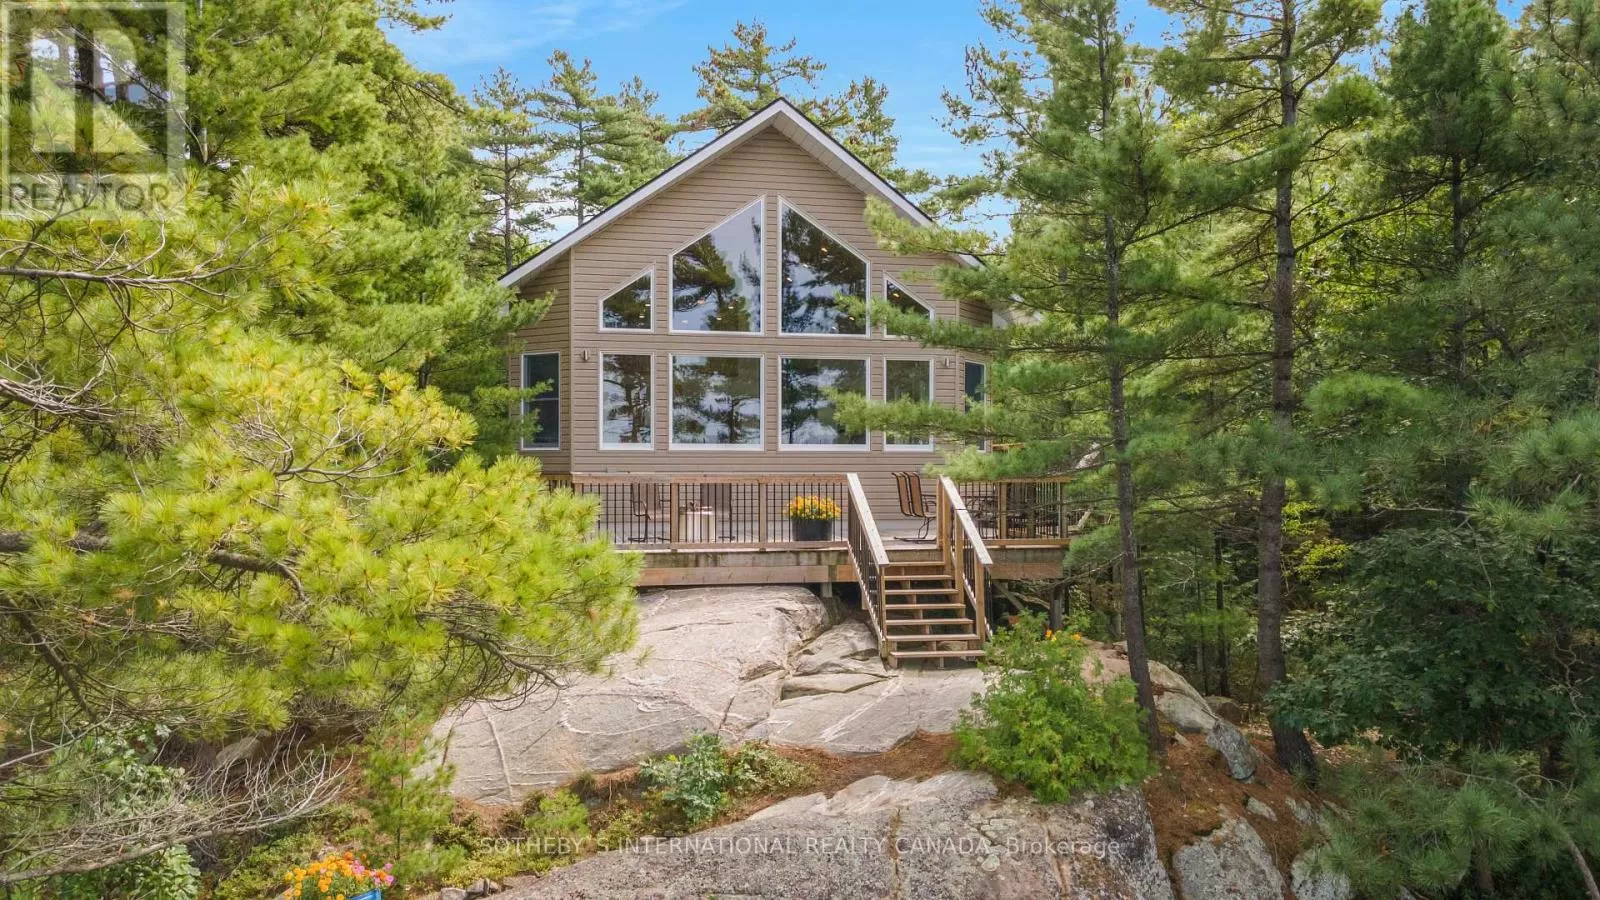 House for rent: 770 Is 200, Georgian Bay, Ontario L0K 1S0